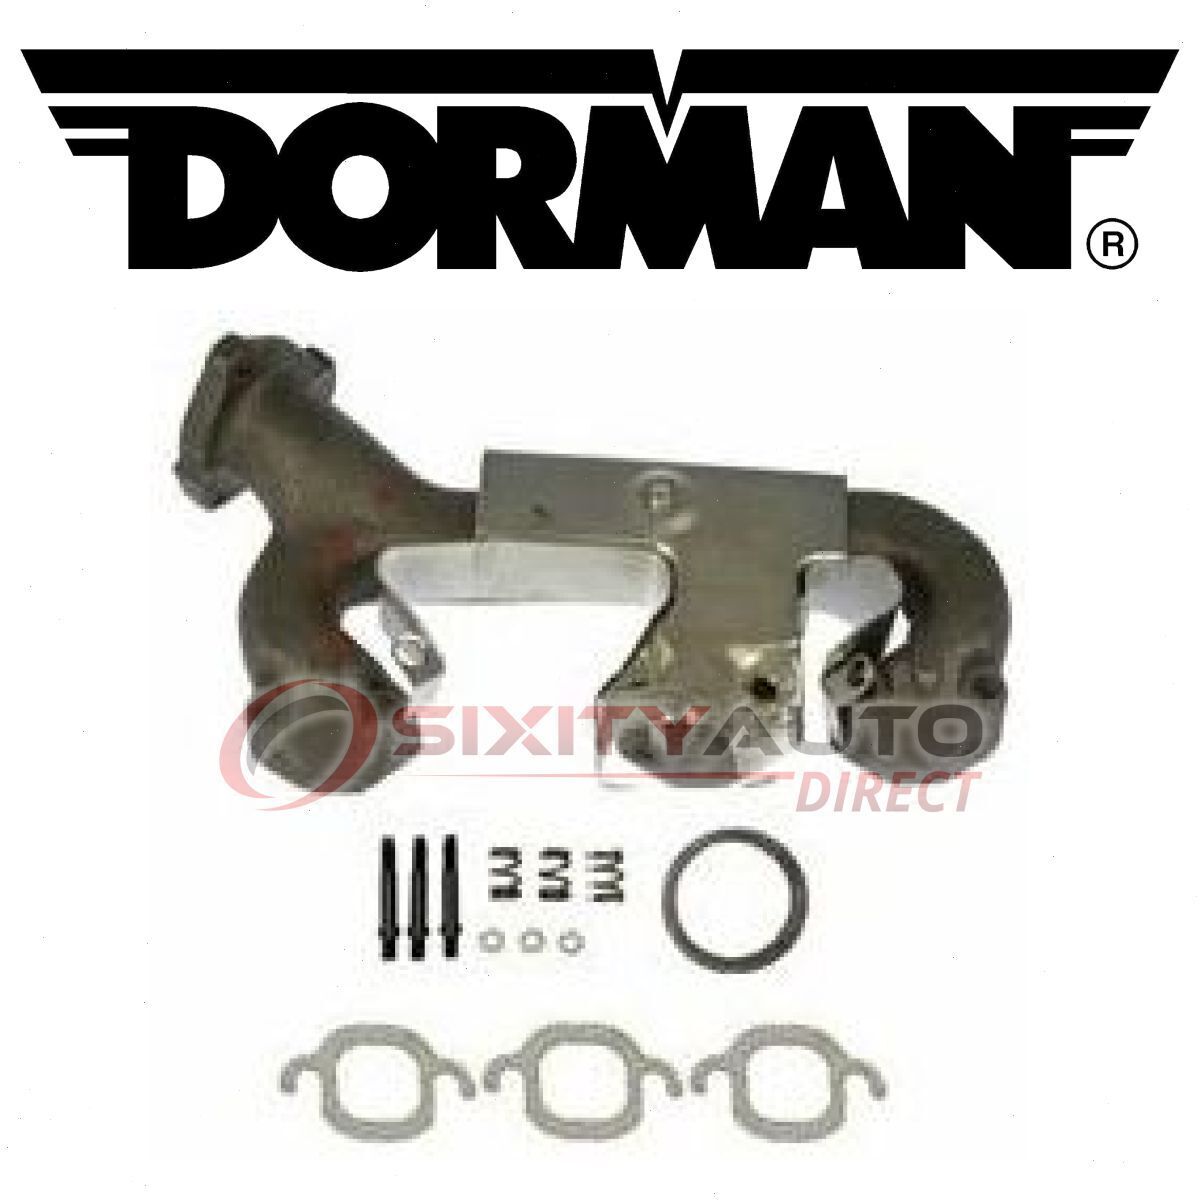 Dorman Left Exhaust Manifold for 1991 GMC Syclone Manifolds  ou